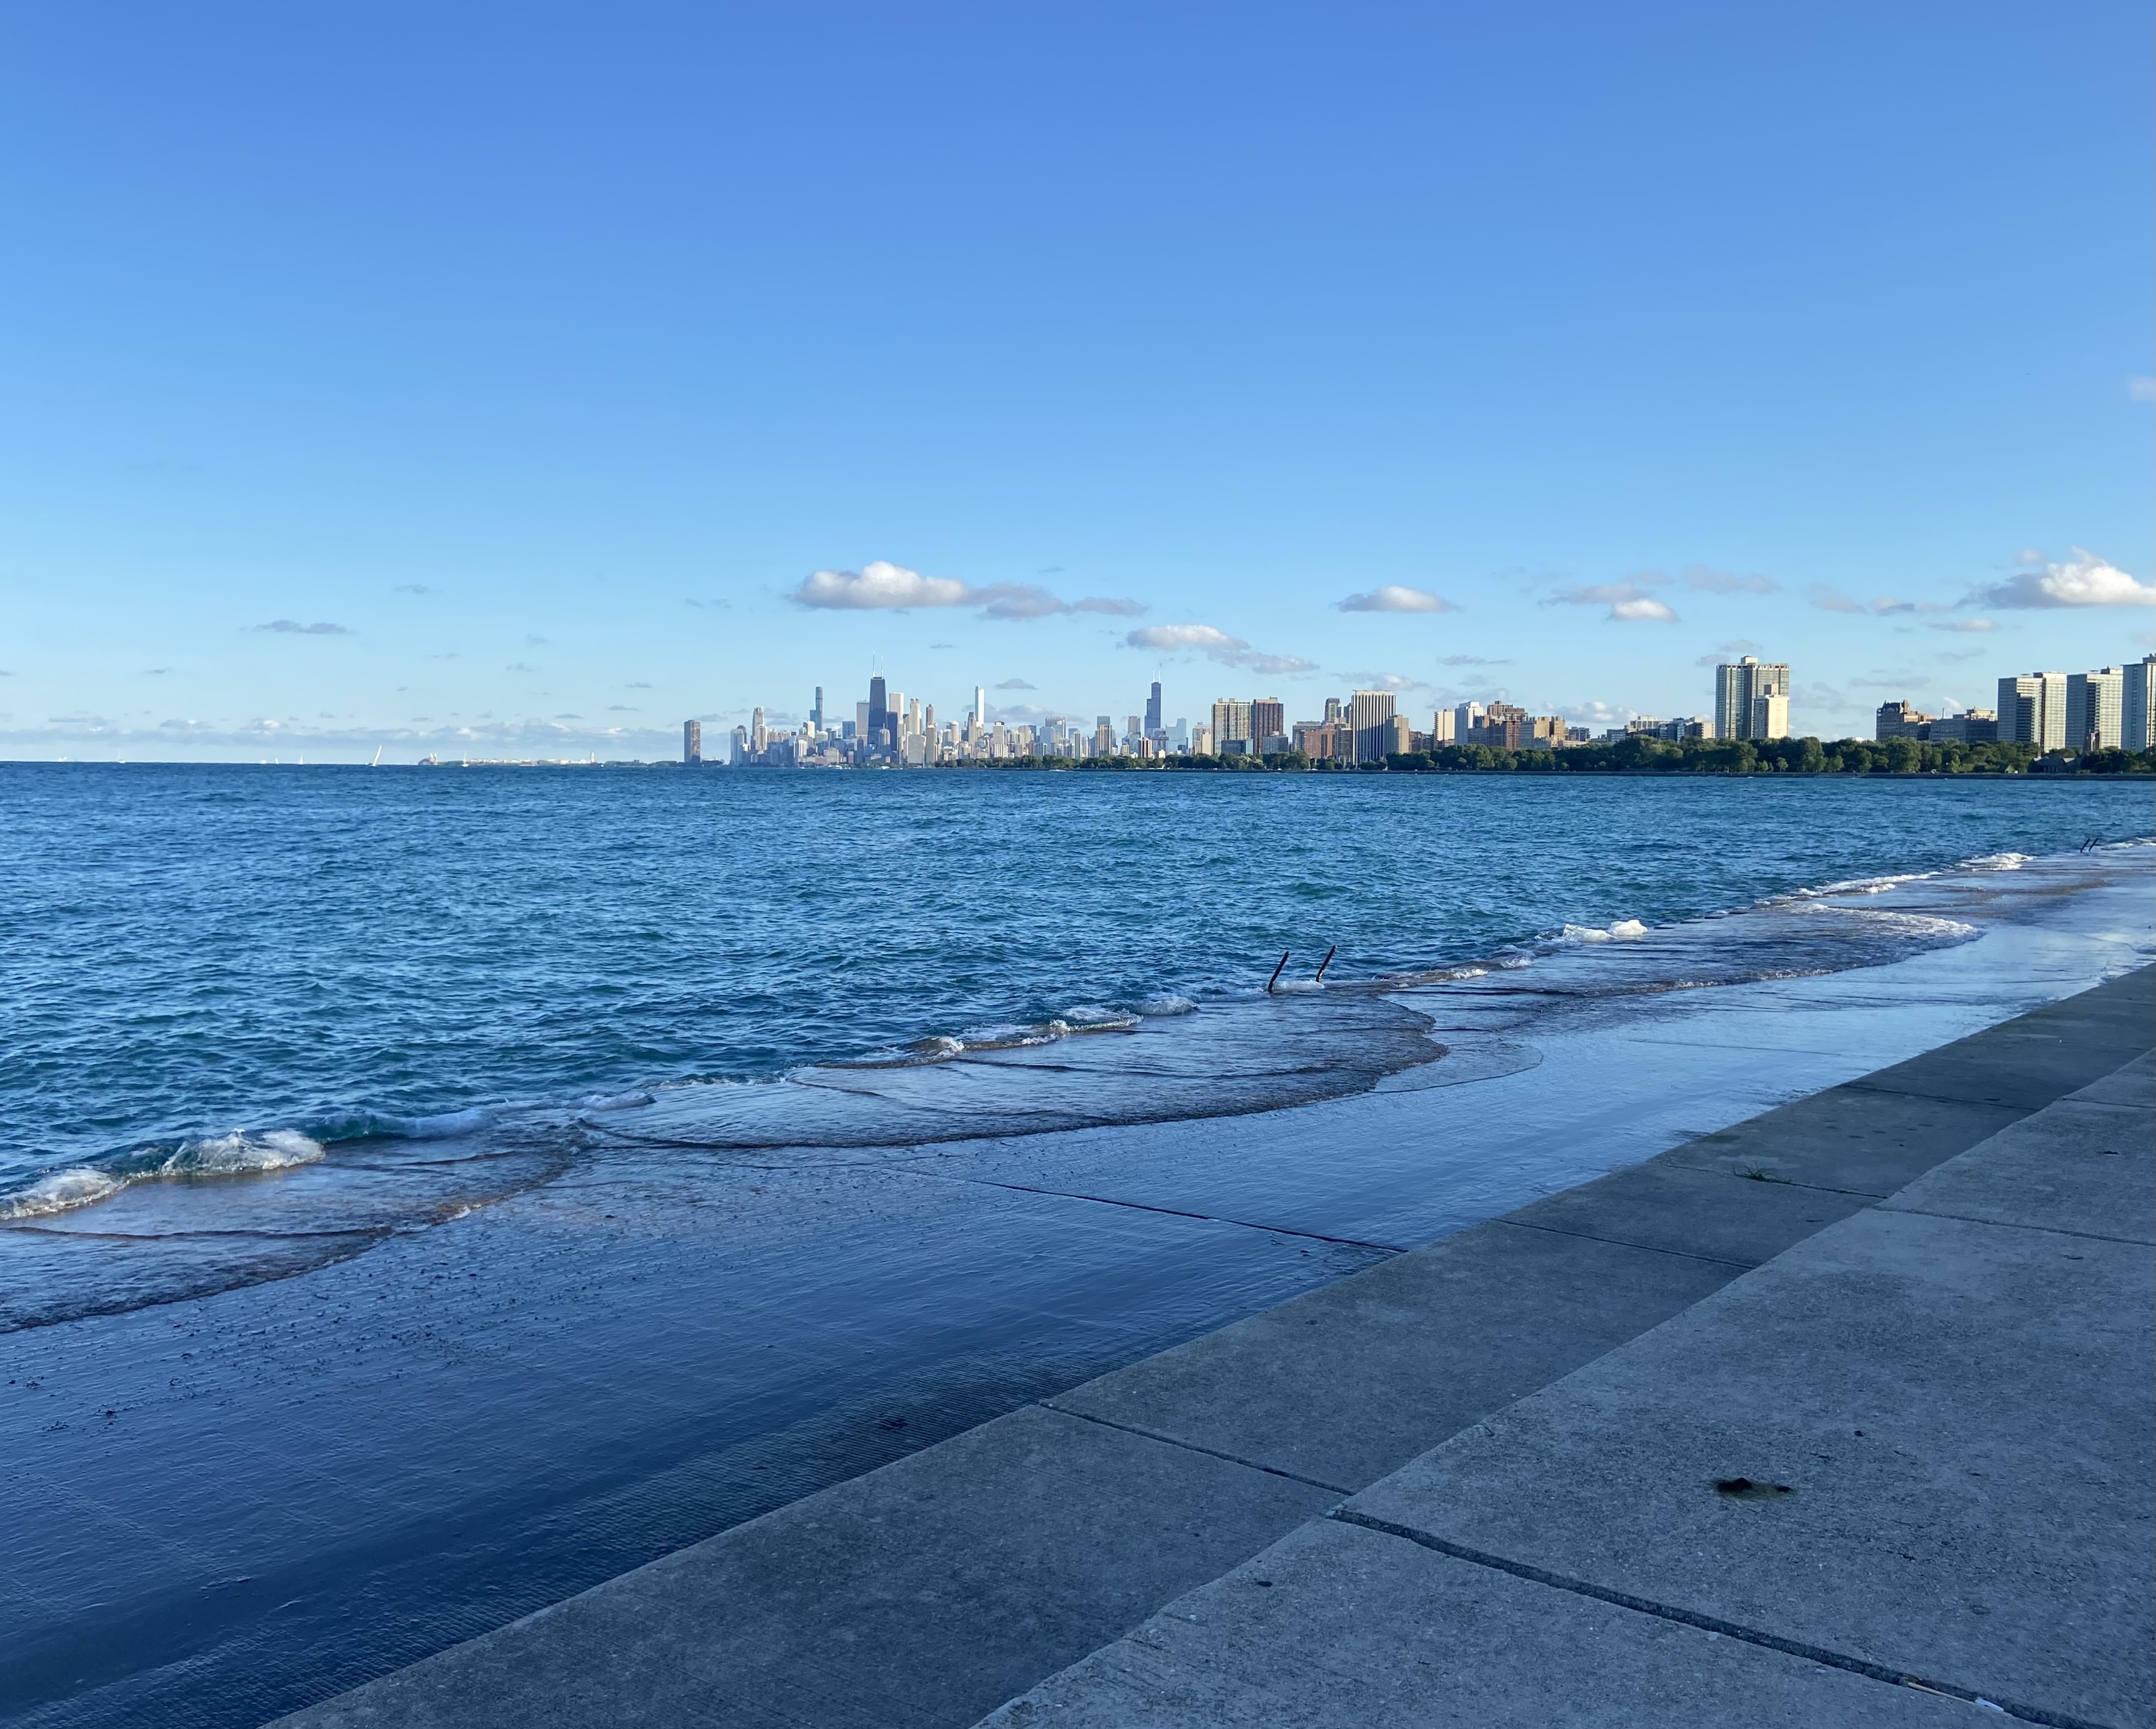 Image of Lake Michigan with the Chicago Skyline in the distance